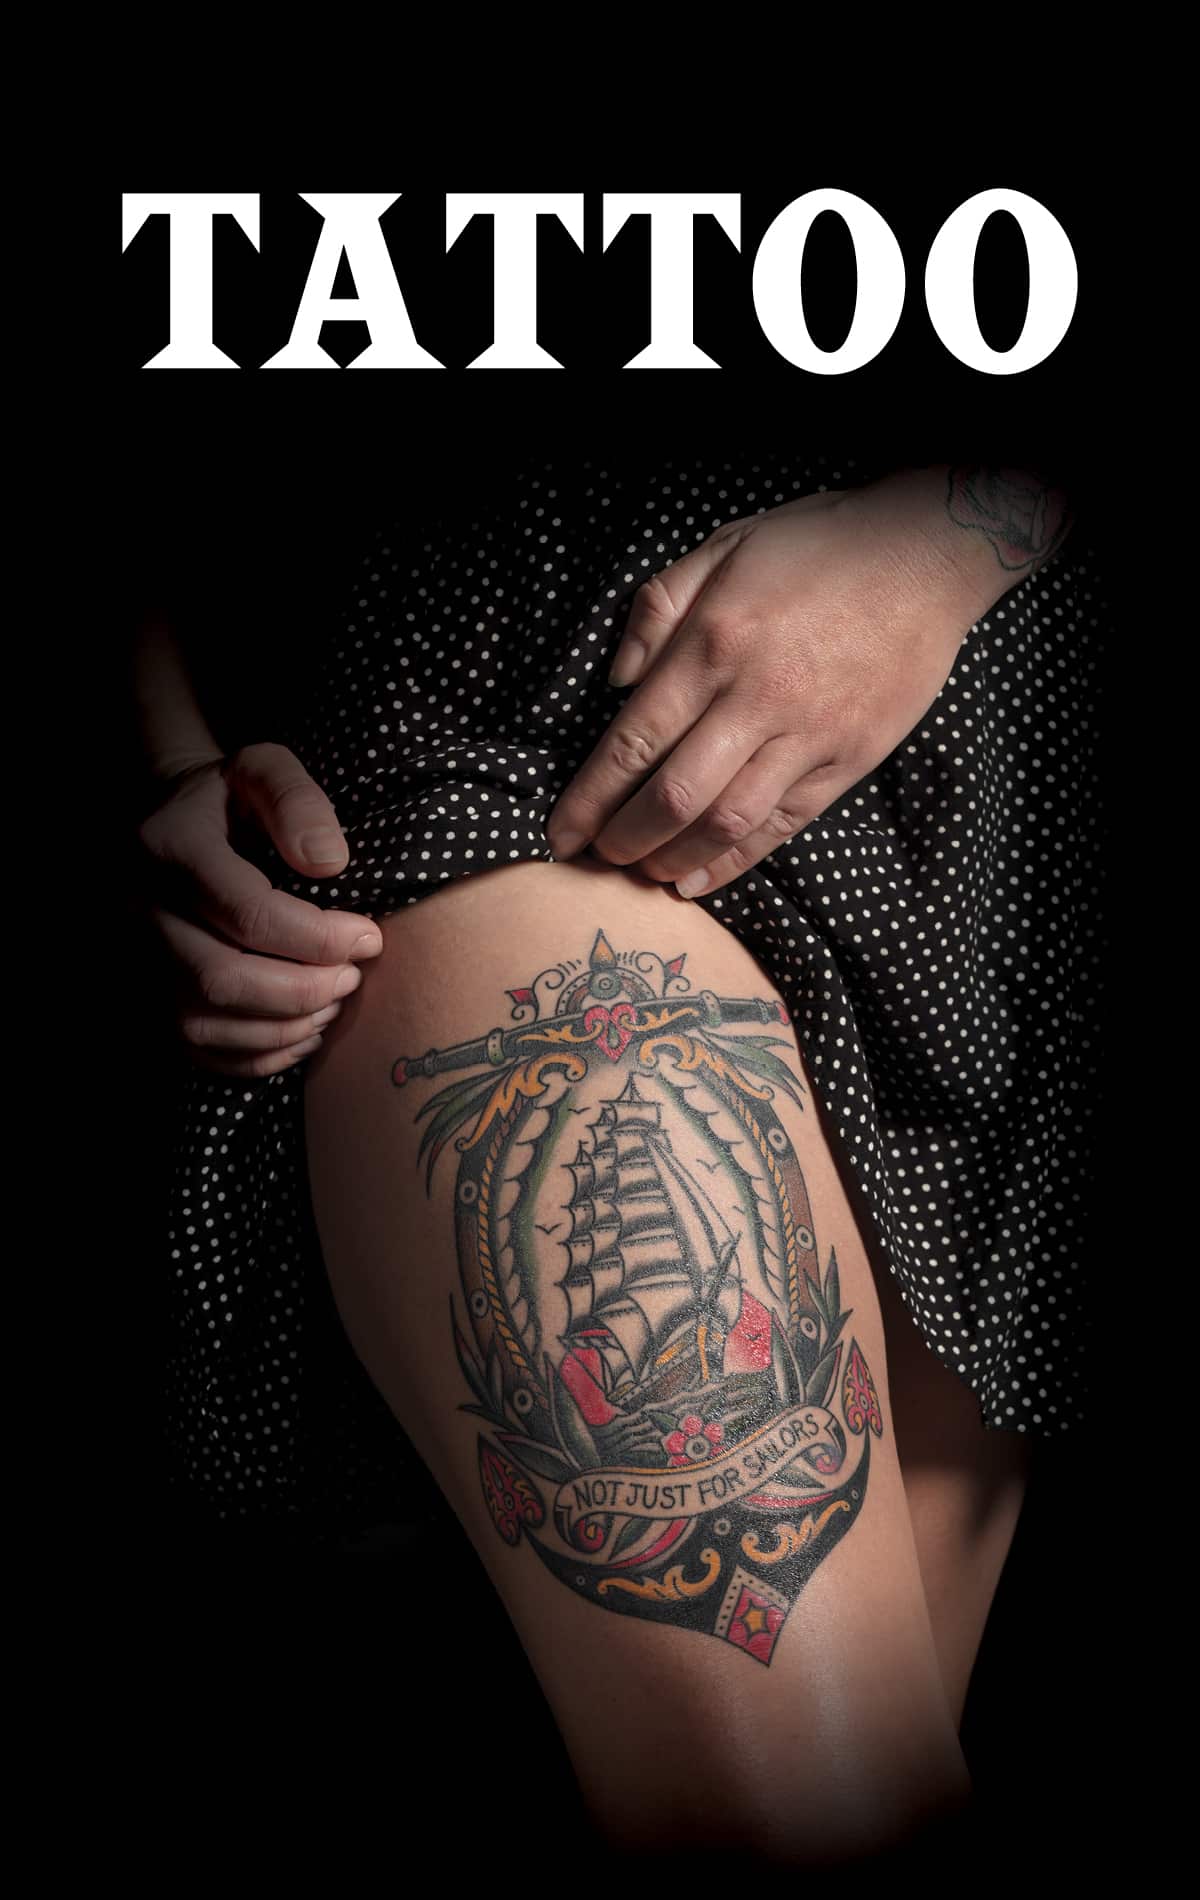 Across the top of the image, 'Tattoo' is written in white font. Underneath, a woman shows a tattoo on her thigh that depicts a sailing ship and has 'not just for sailors' written below it.